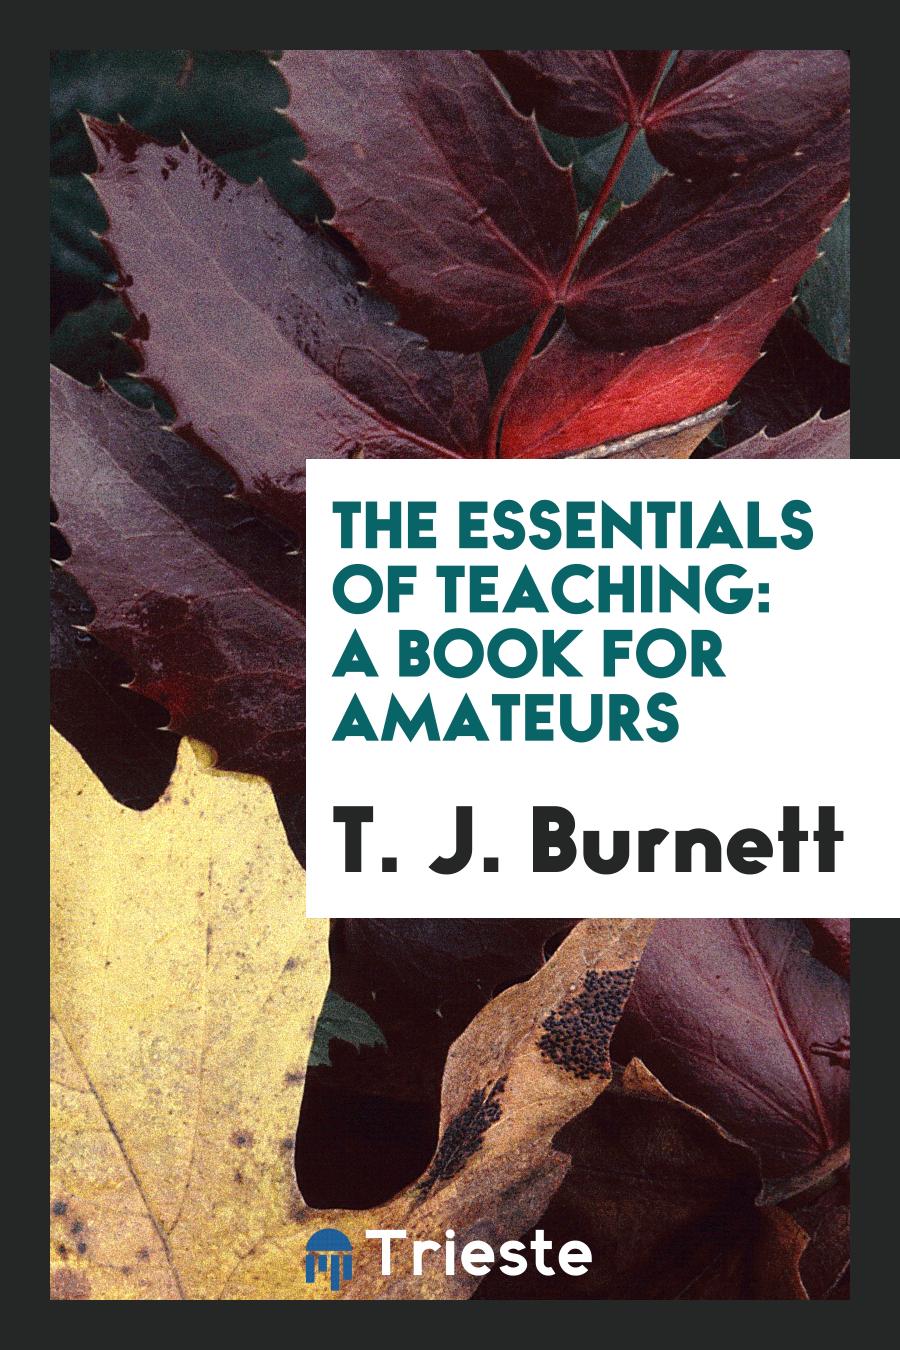 The Essentials of Teaching: A Book for Amateurs